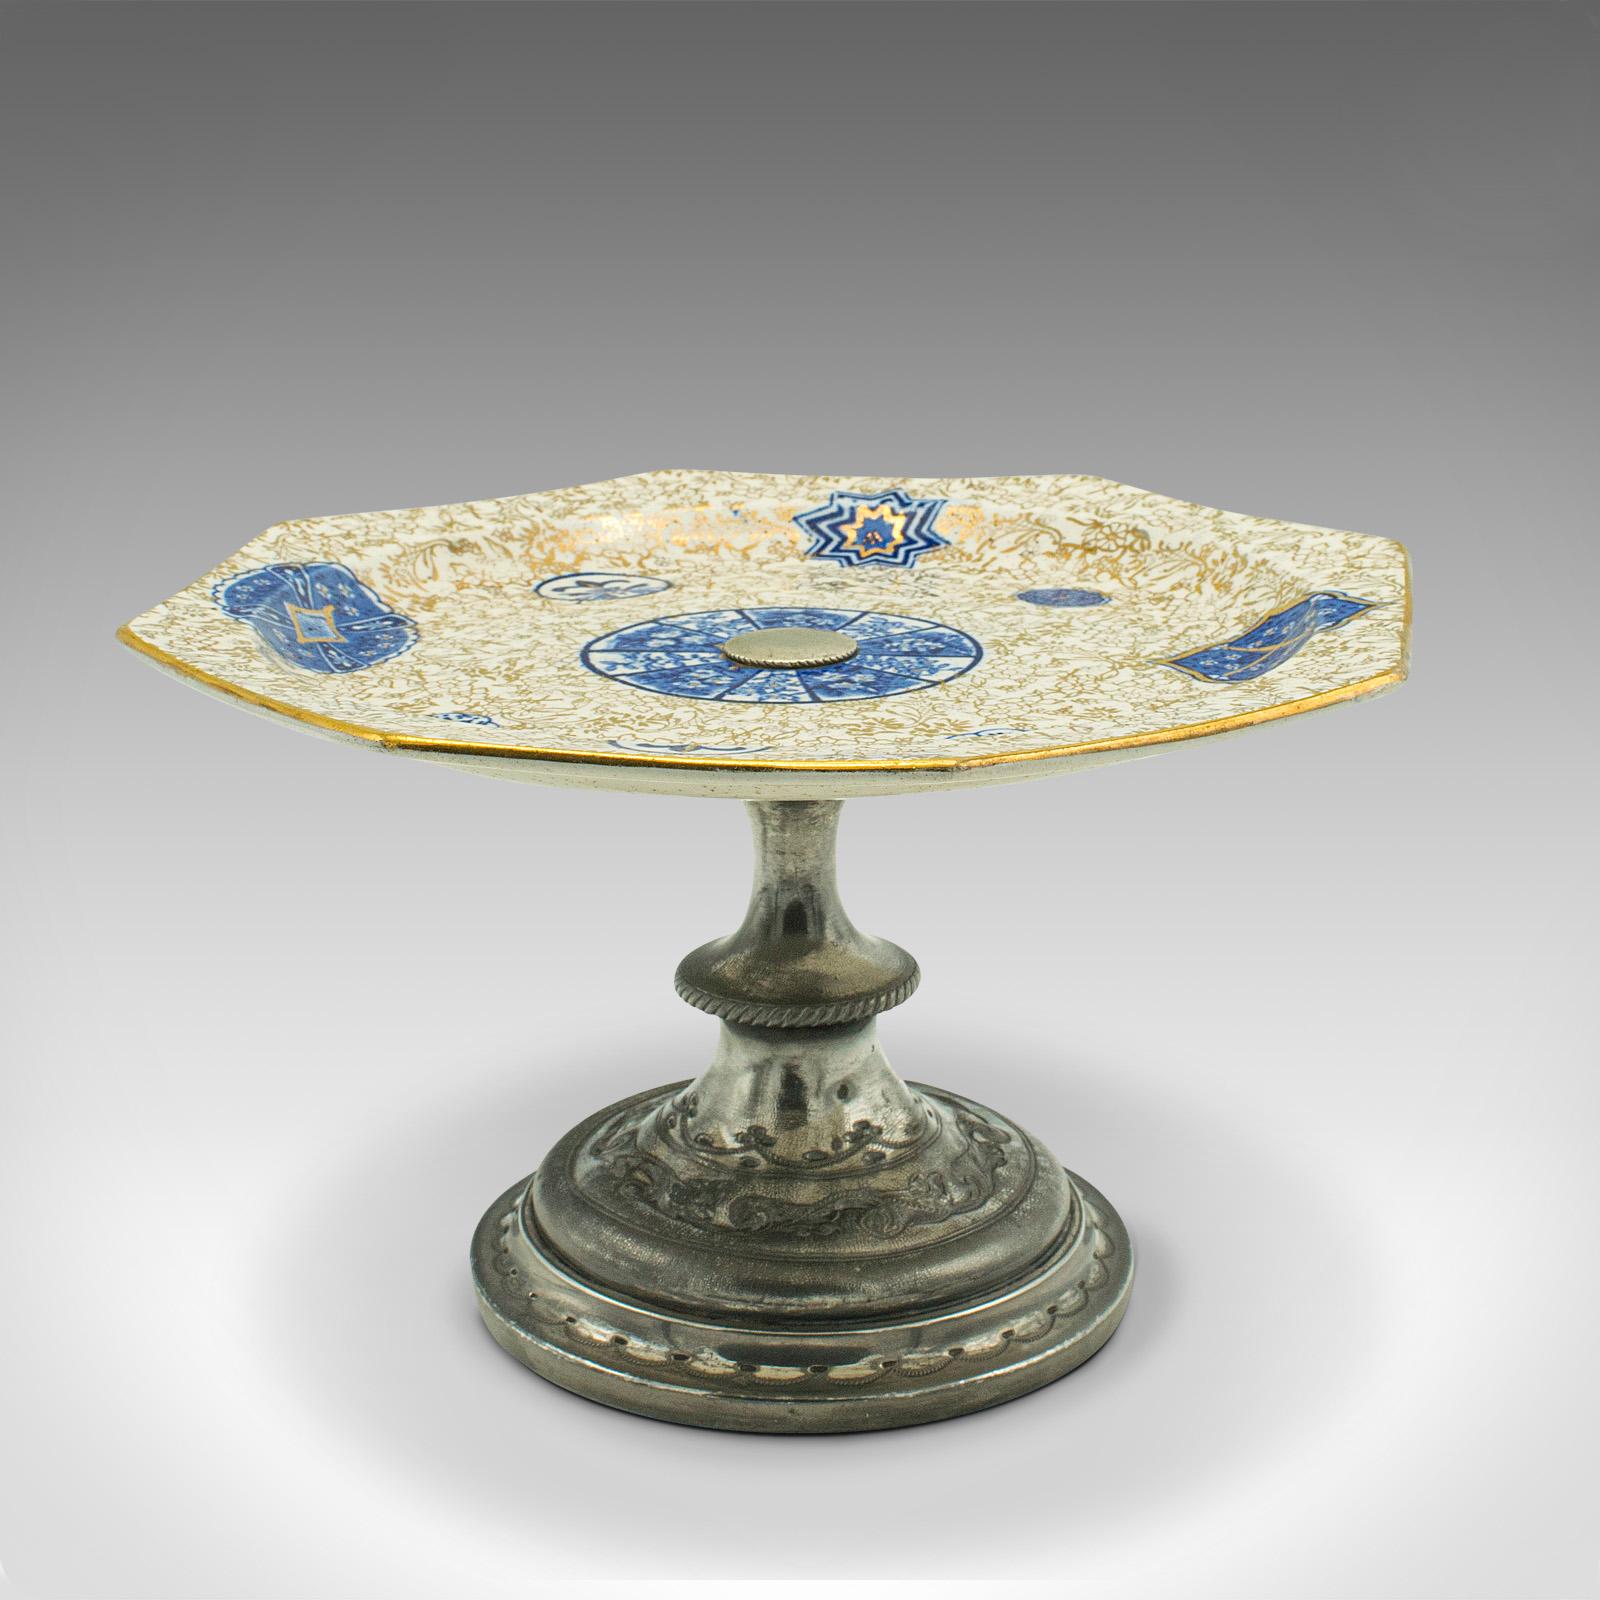 This is an antique decorative serving set. An English, ceramic cake Stand and bon bon dish, dating to the early 20th century, circa 1920.

Pleasingly decorative pieces, with profuse patterns and gilt tonality
Displaying a desirable aged patina